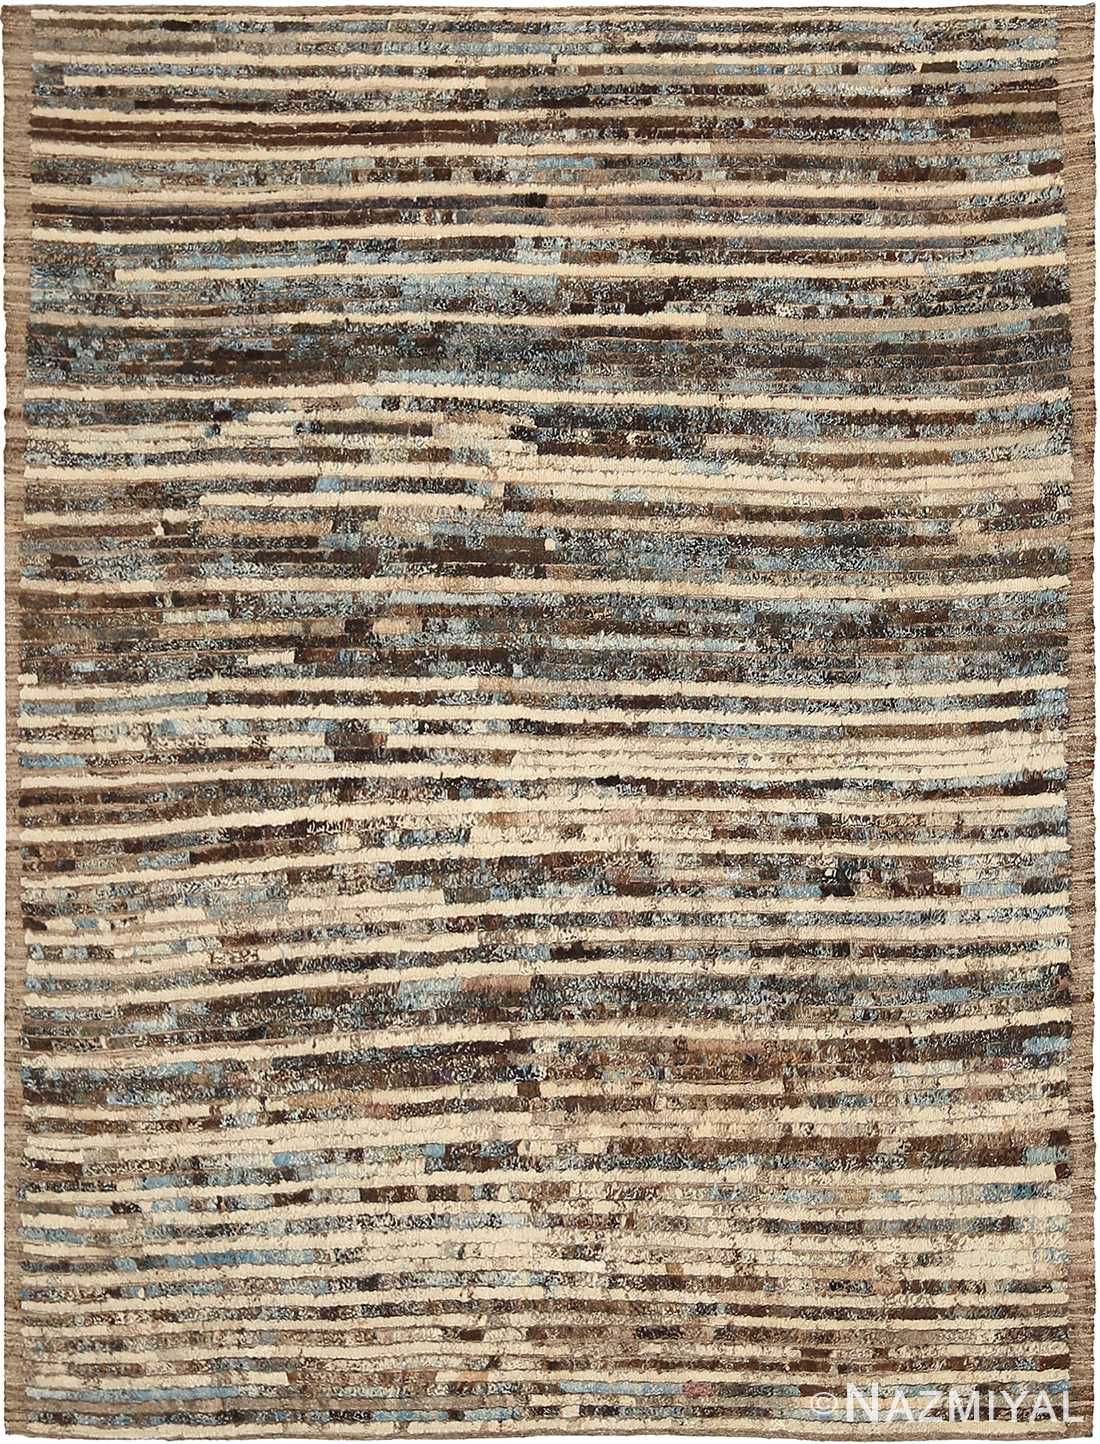 Brown and Beige Modern Moroccan Style Rug 60346 by Nazmiyal NYC